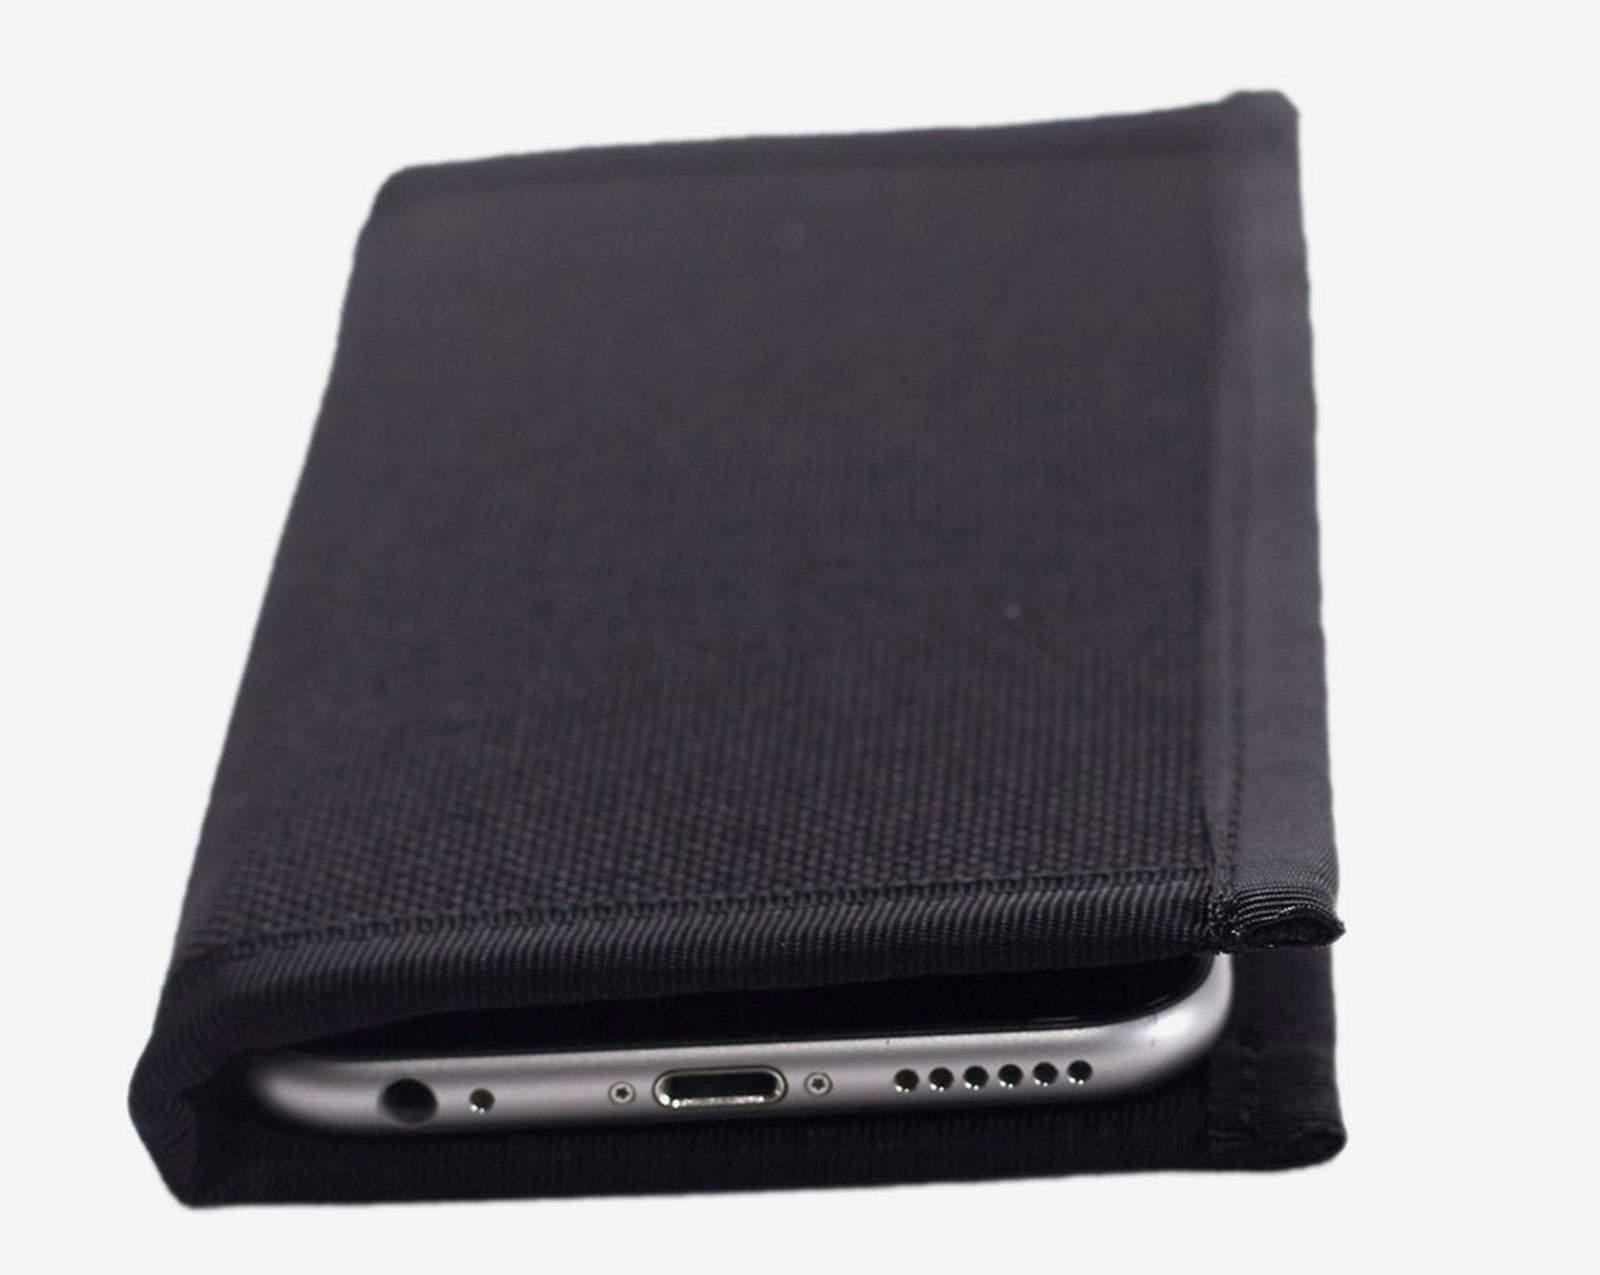 Edward Field introduces a nylon iPhone wallet case designed for the person active outdoors.